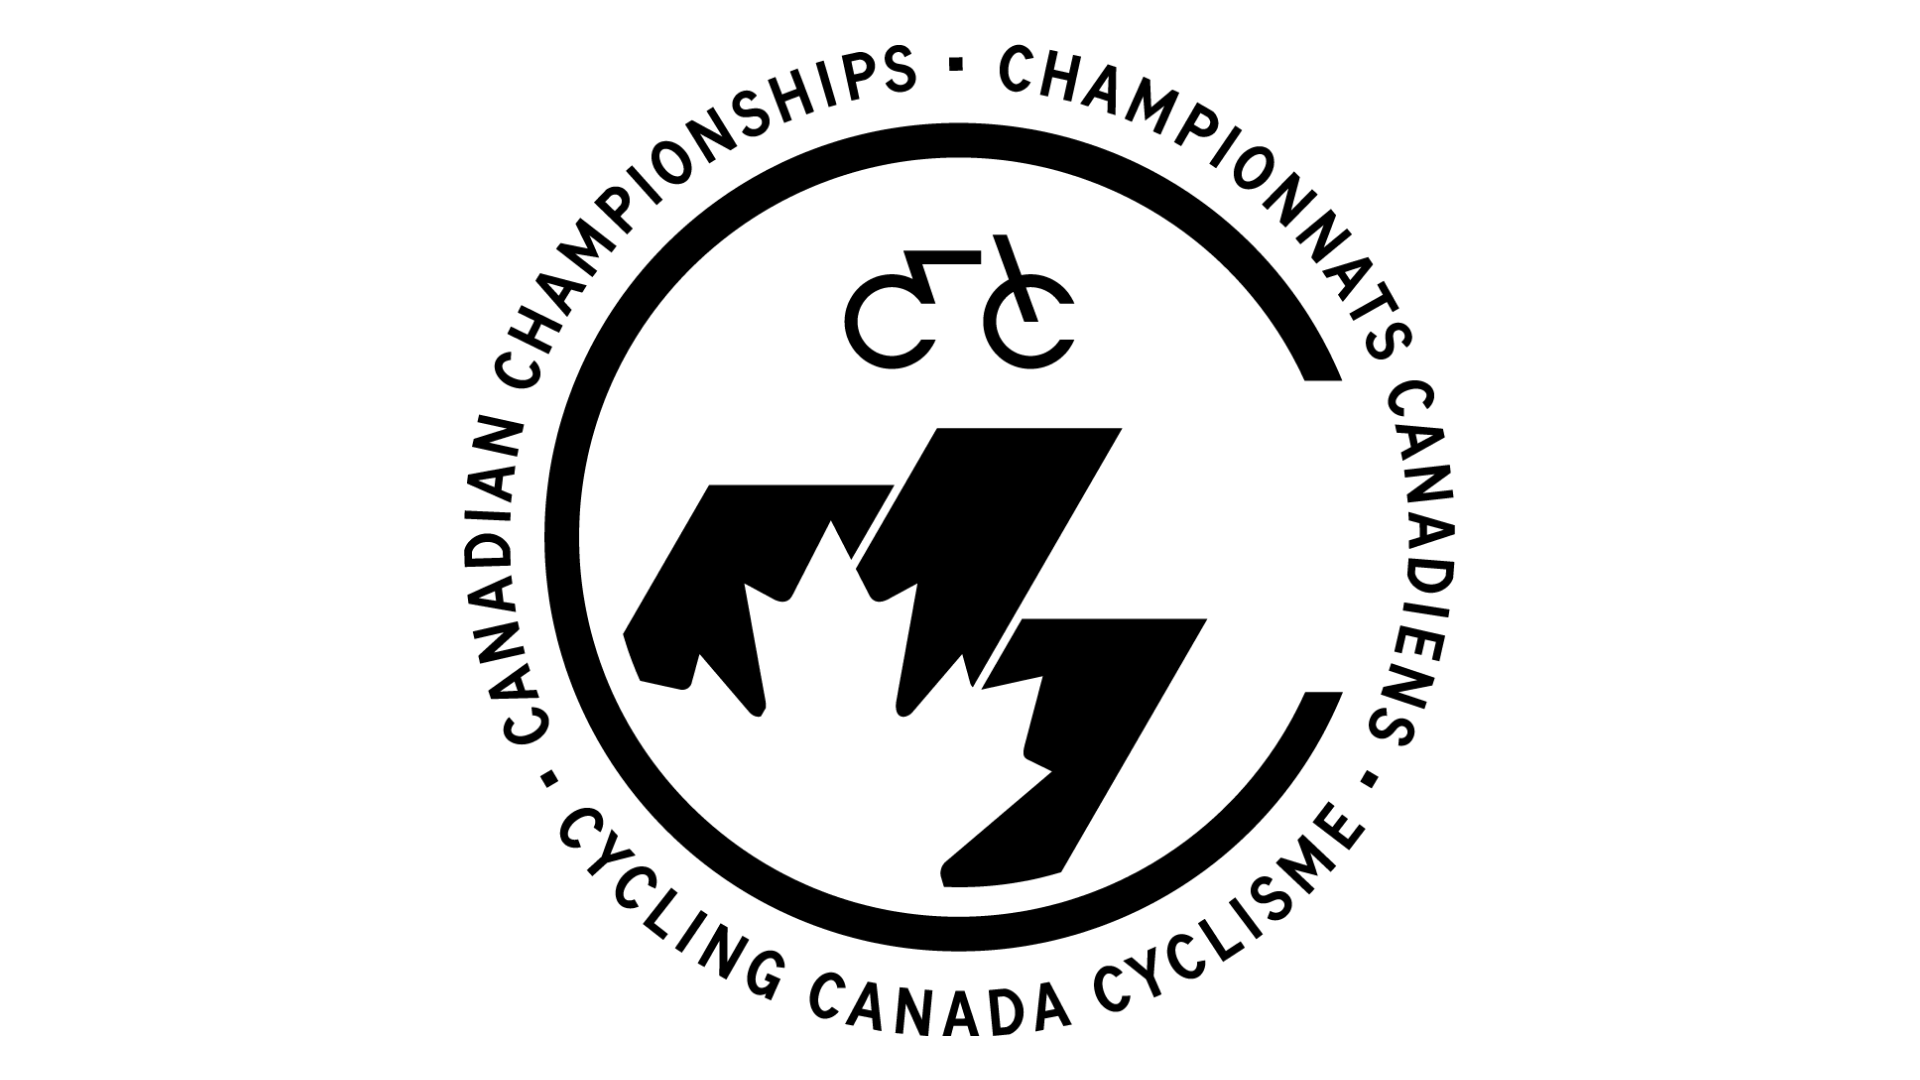 Canadian National Cycling championships logo, with a stylized maple leaf and small bicycle